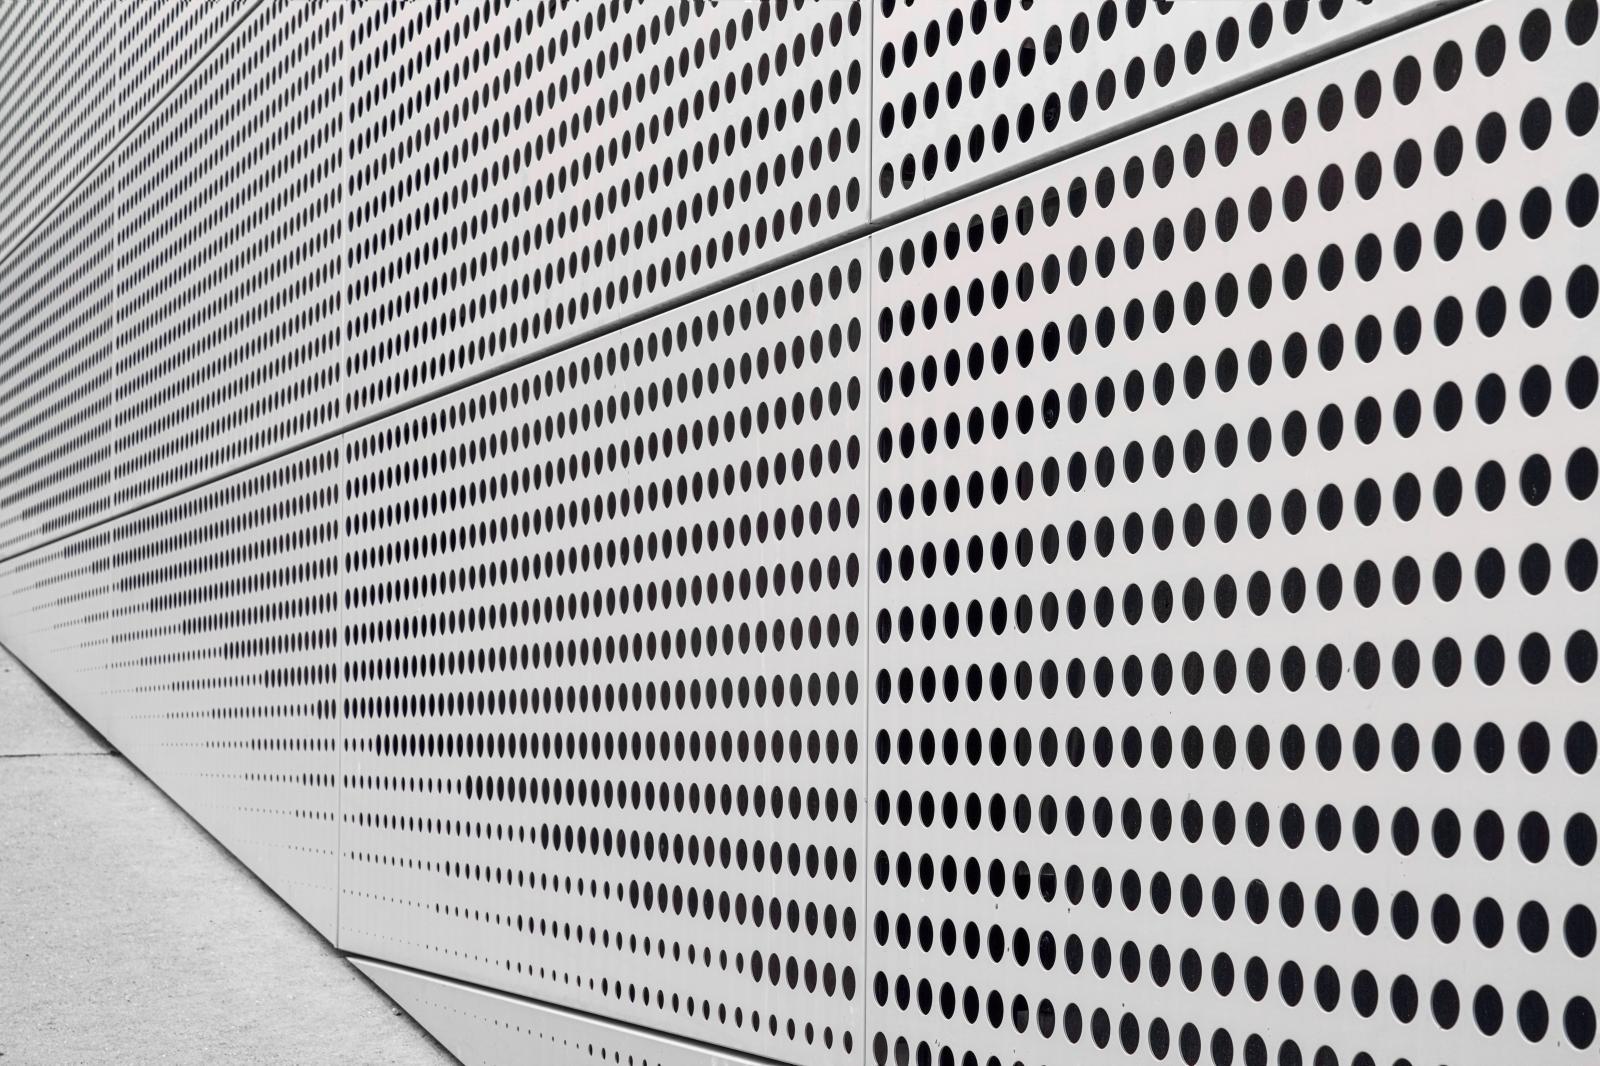 Perforated Performance: A mesmerizing Pattern of Dots | Buy this image